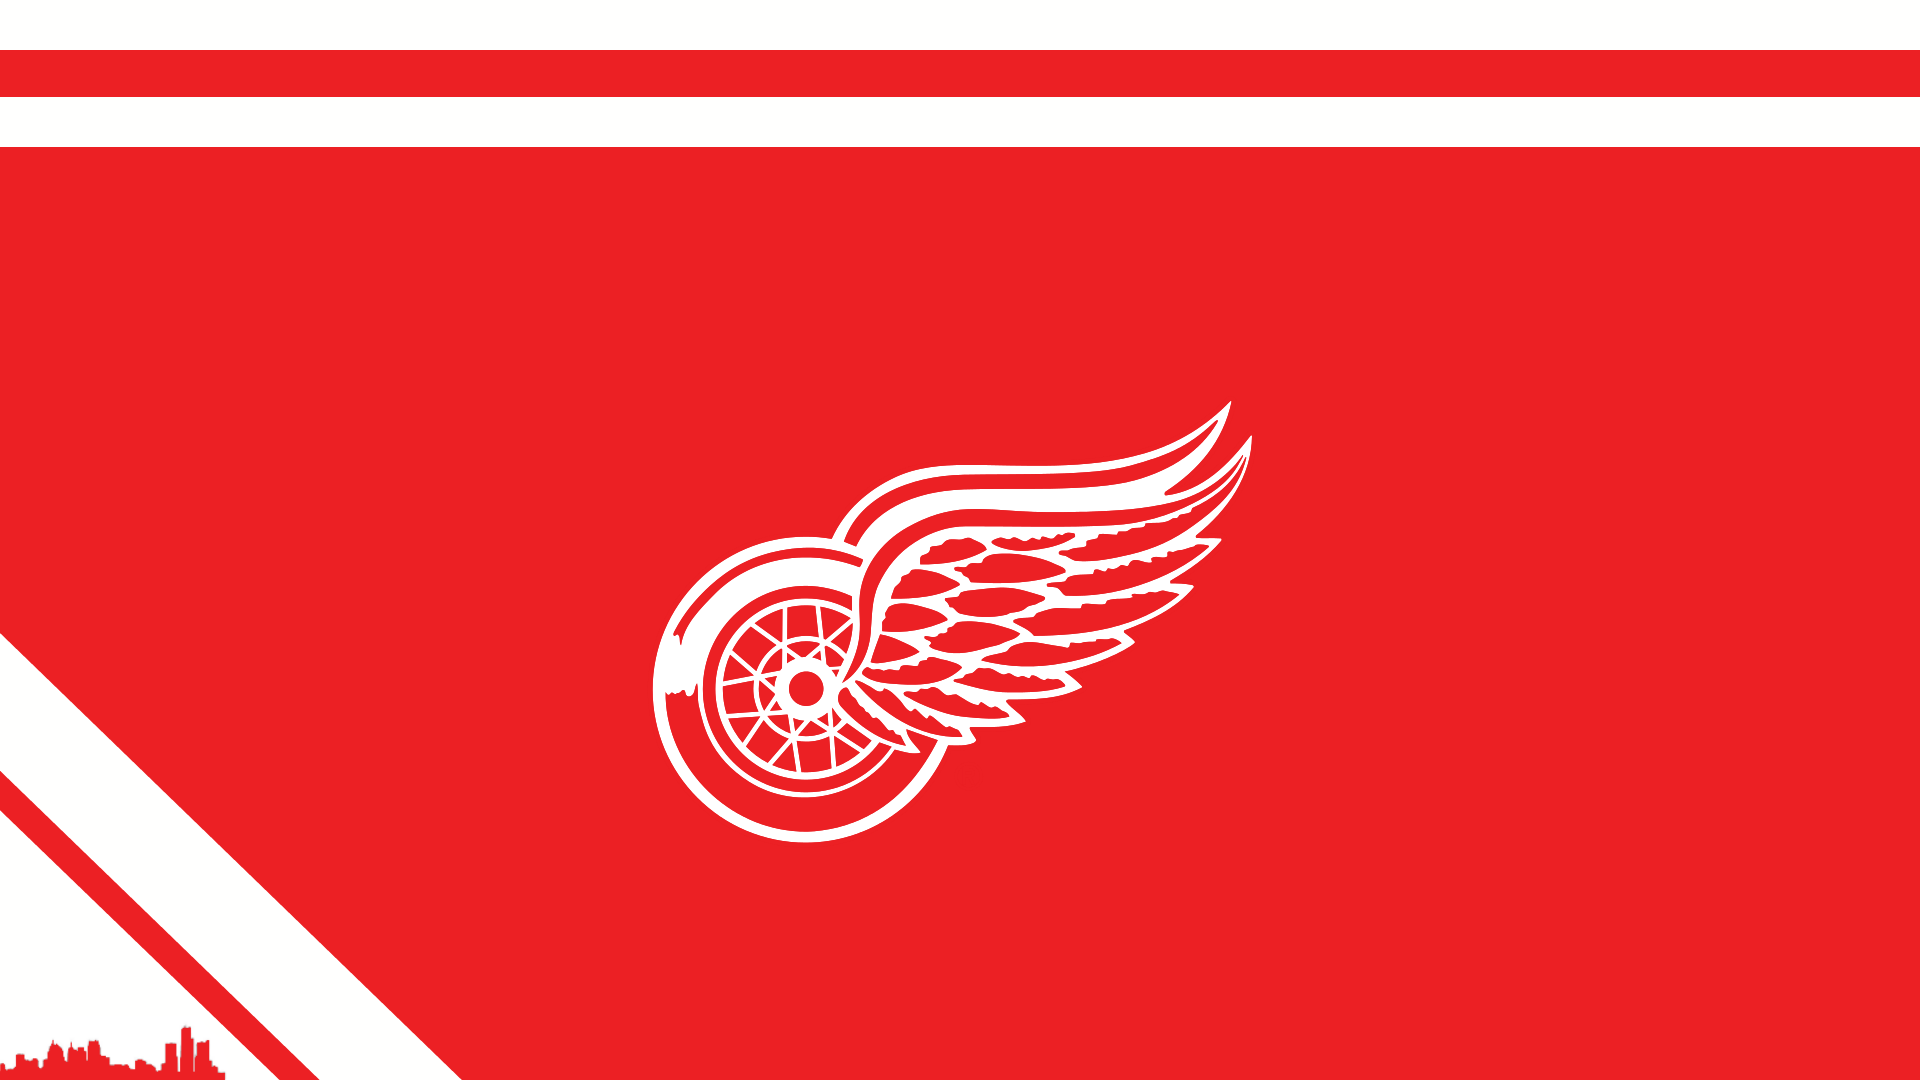 I'm making a jersey inspired desktop background for each team